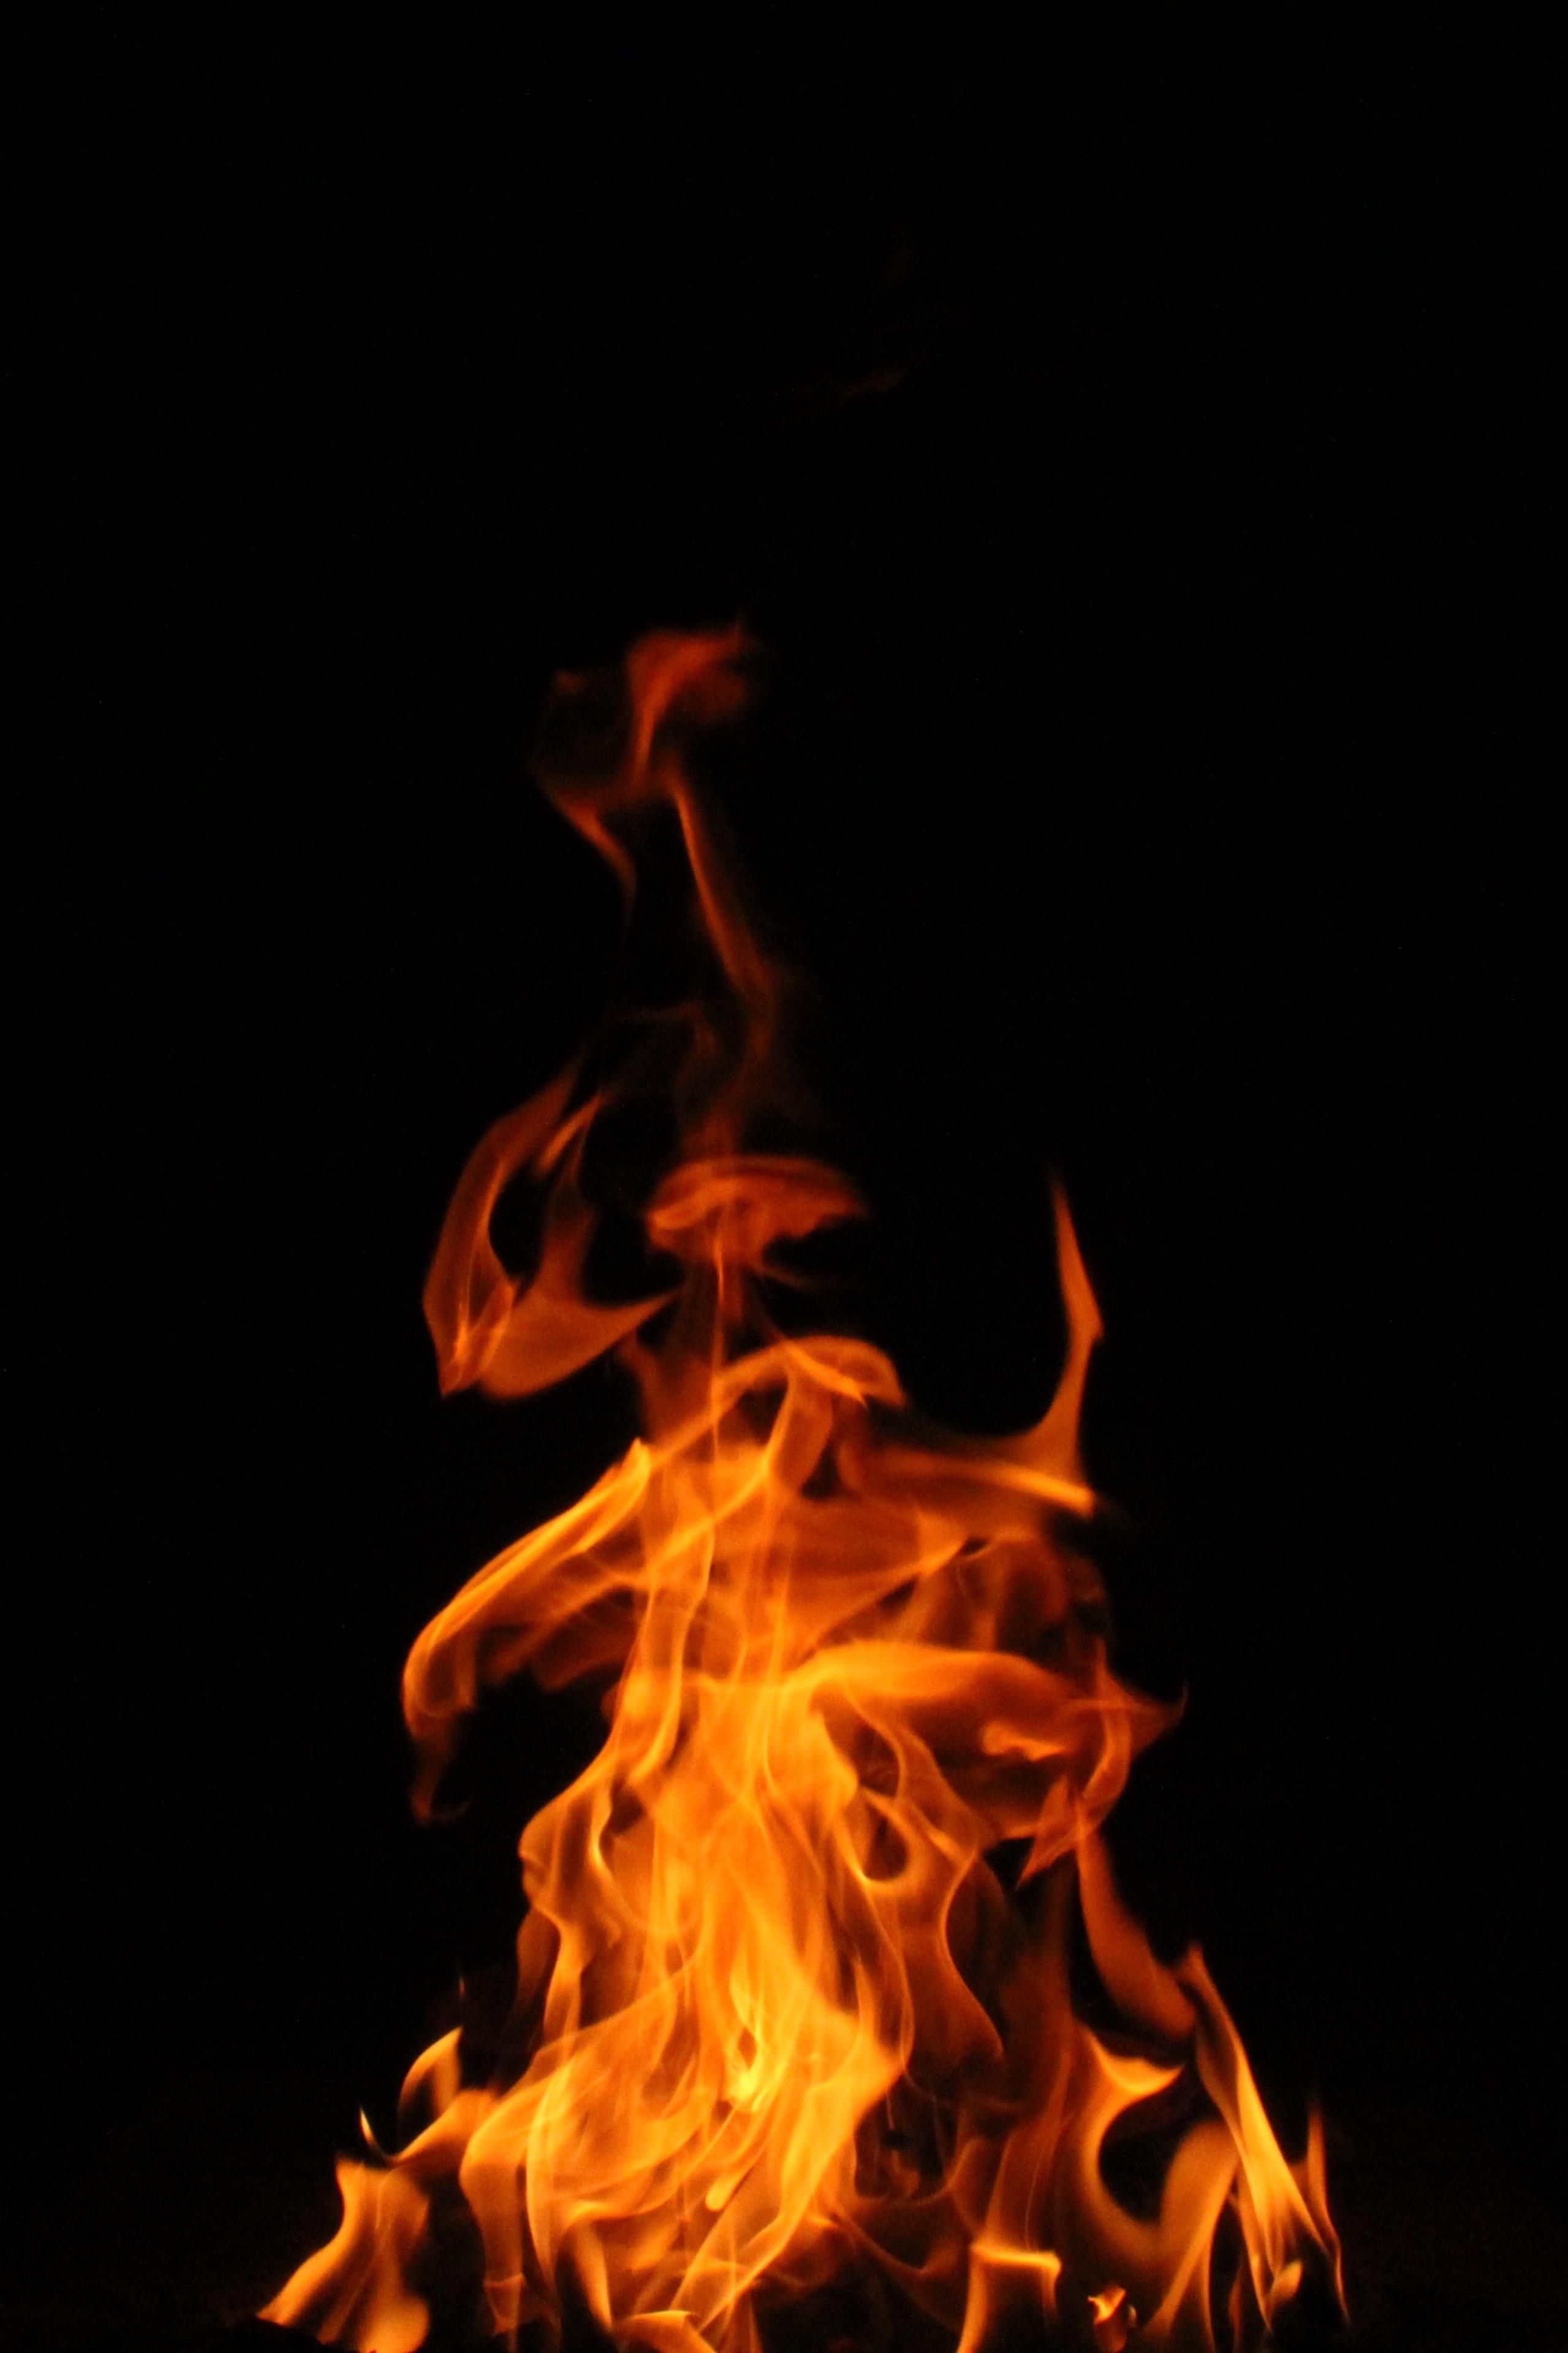 Best AMOLED Fire image. Fire, Fire image, Fire photography